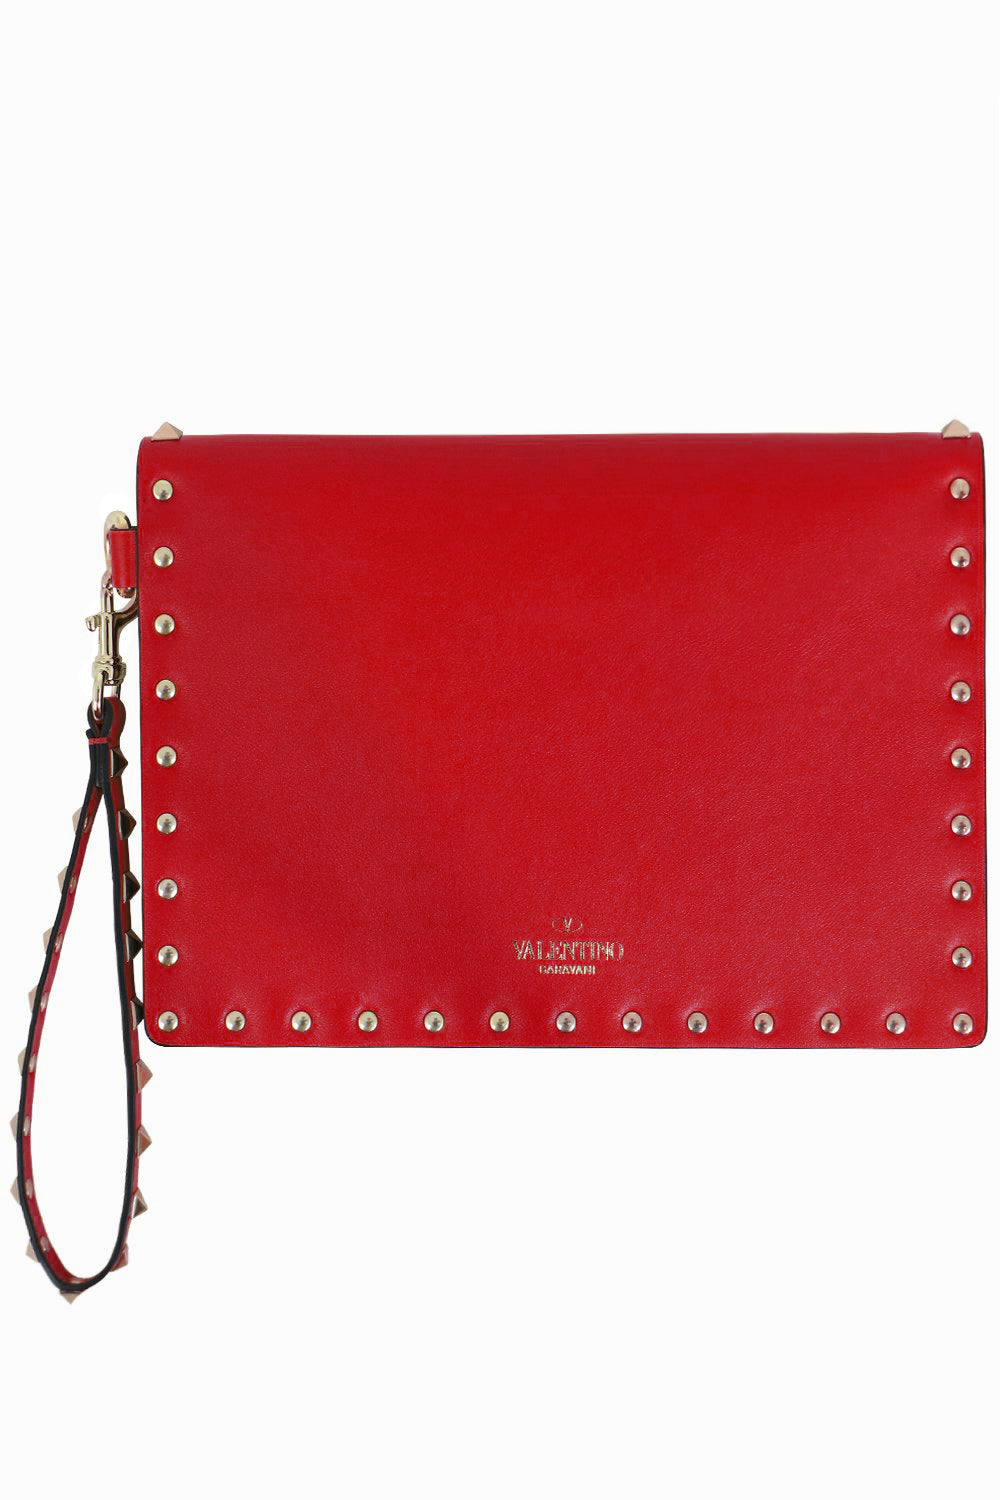 VALENTINO BAGS RED SMALL ROCKSTUD ENVELOPE POUCH SMOOTH LEATHER RED